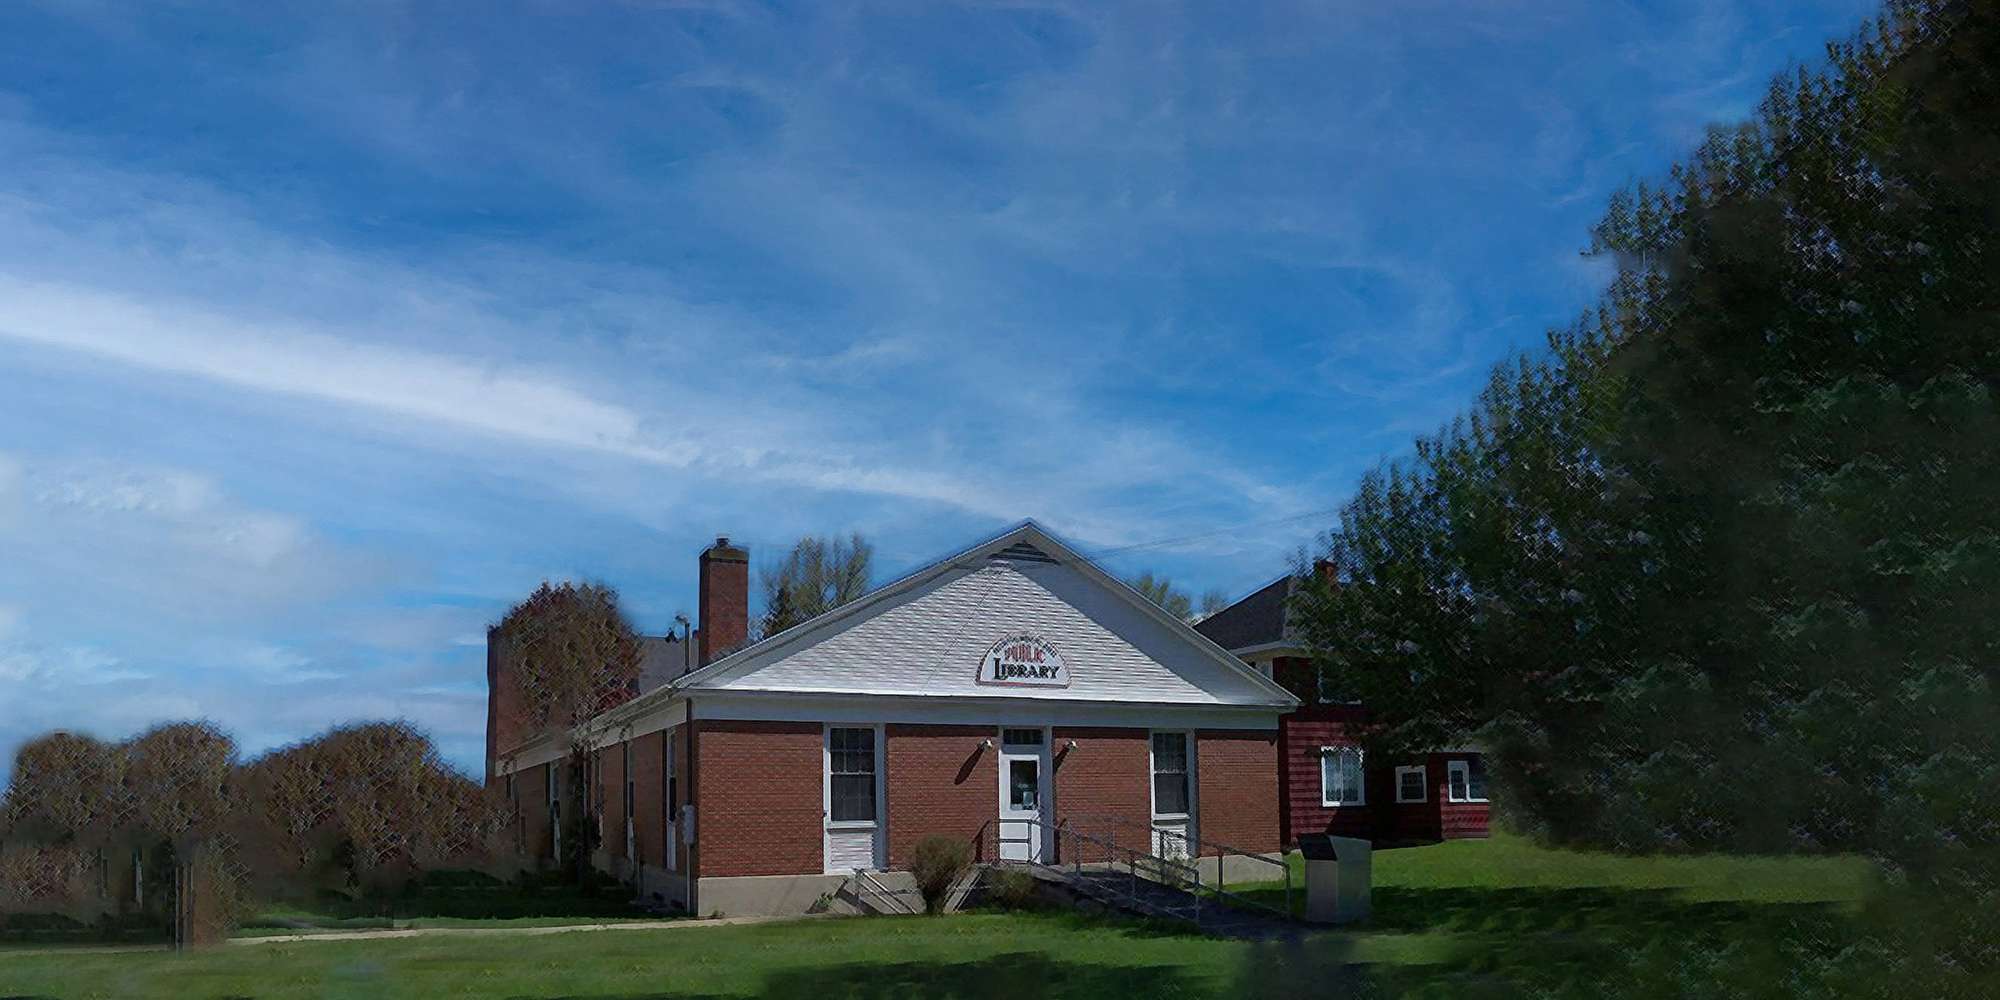 Photo of a public library in Groveton, New Hampshire